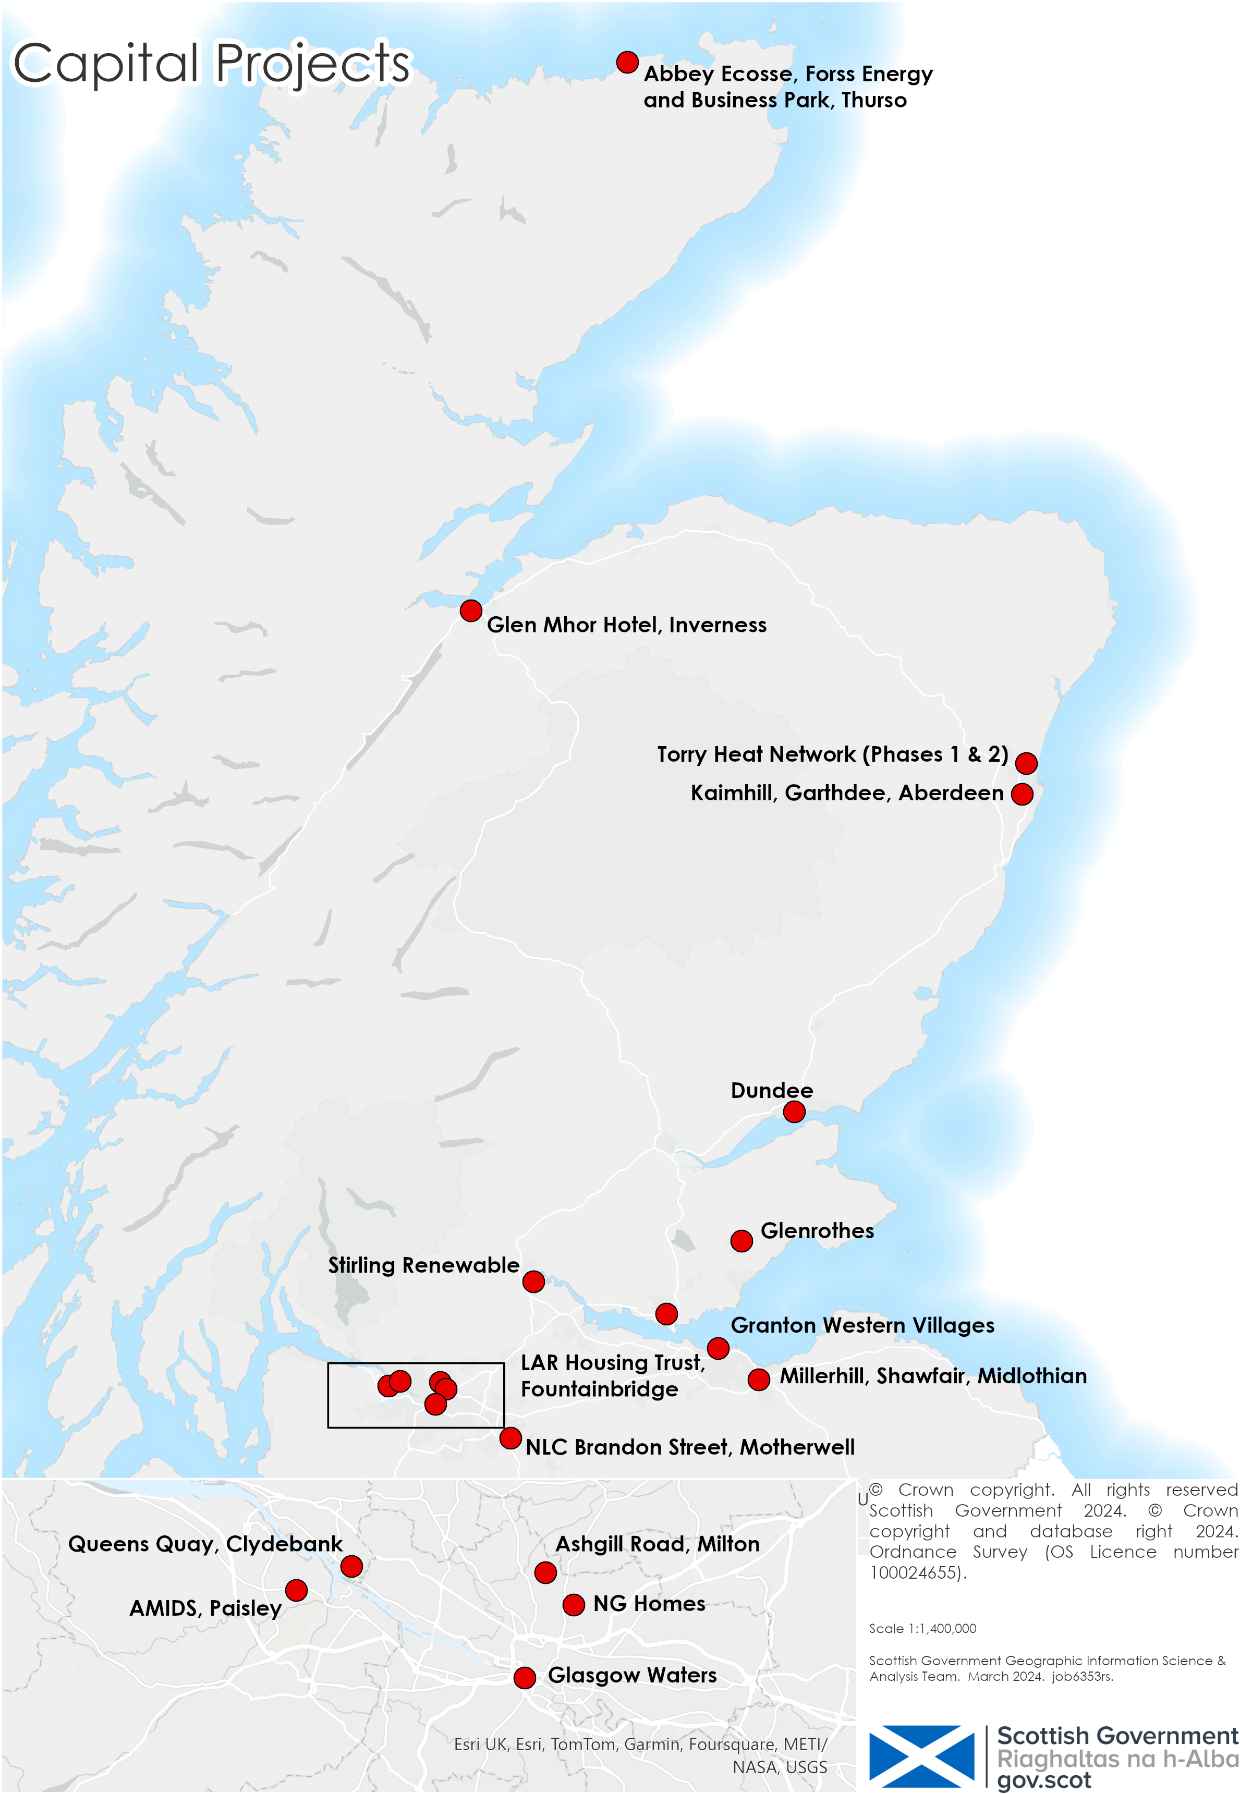 Map locating capital projects supported by the Scotland’s Heat Network Fund (SHNF). List of capital projects shown on the map are as follows:
1. Abbey Ecosse, Forss Energy and
Business Park, Thurso 
2. Glen Mhor Hotel, Inverness 
3. Torry, Inverness (Phase 1 and 2)
4. Kaimhill, Garthdee, Aberdeen
5. Granton Western Villages 
6. LAR Housing Trust, Fountainbridge
7. Millerhill, Shawfair, Midlothian 
8. Ashgill Road, Milton 
9. NG Homes 
10. Glasgow Waters 
11. AMIDS, Paisley
12. NLC Brandon Street, Motherwell 
13. Queens Quay, Clydebank 
14. Dundee  
15. Glenrothes
16. Stirling Renewable 
